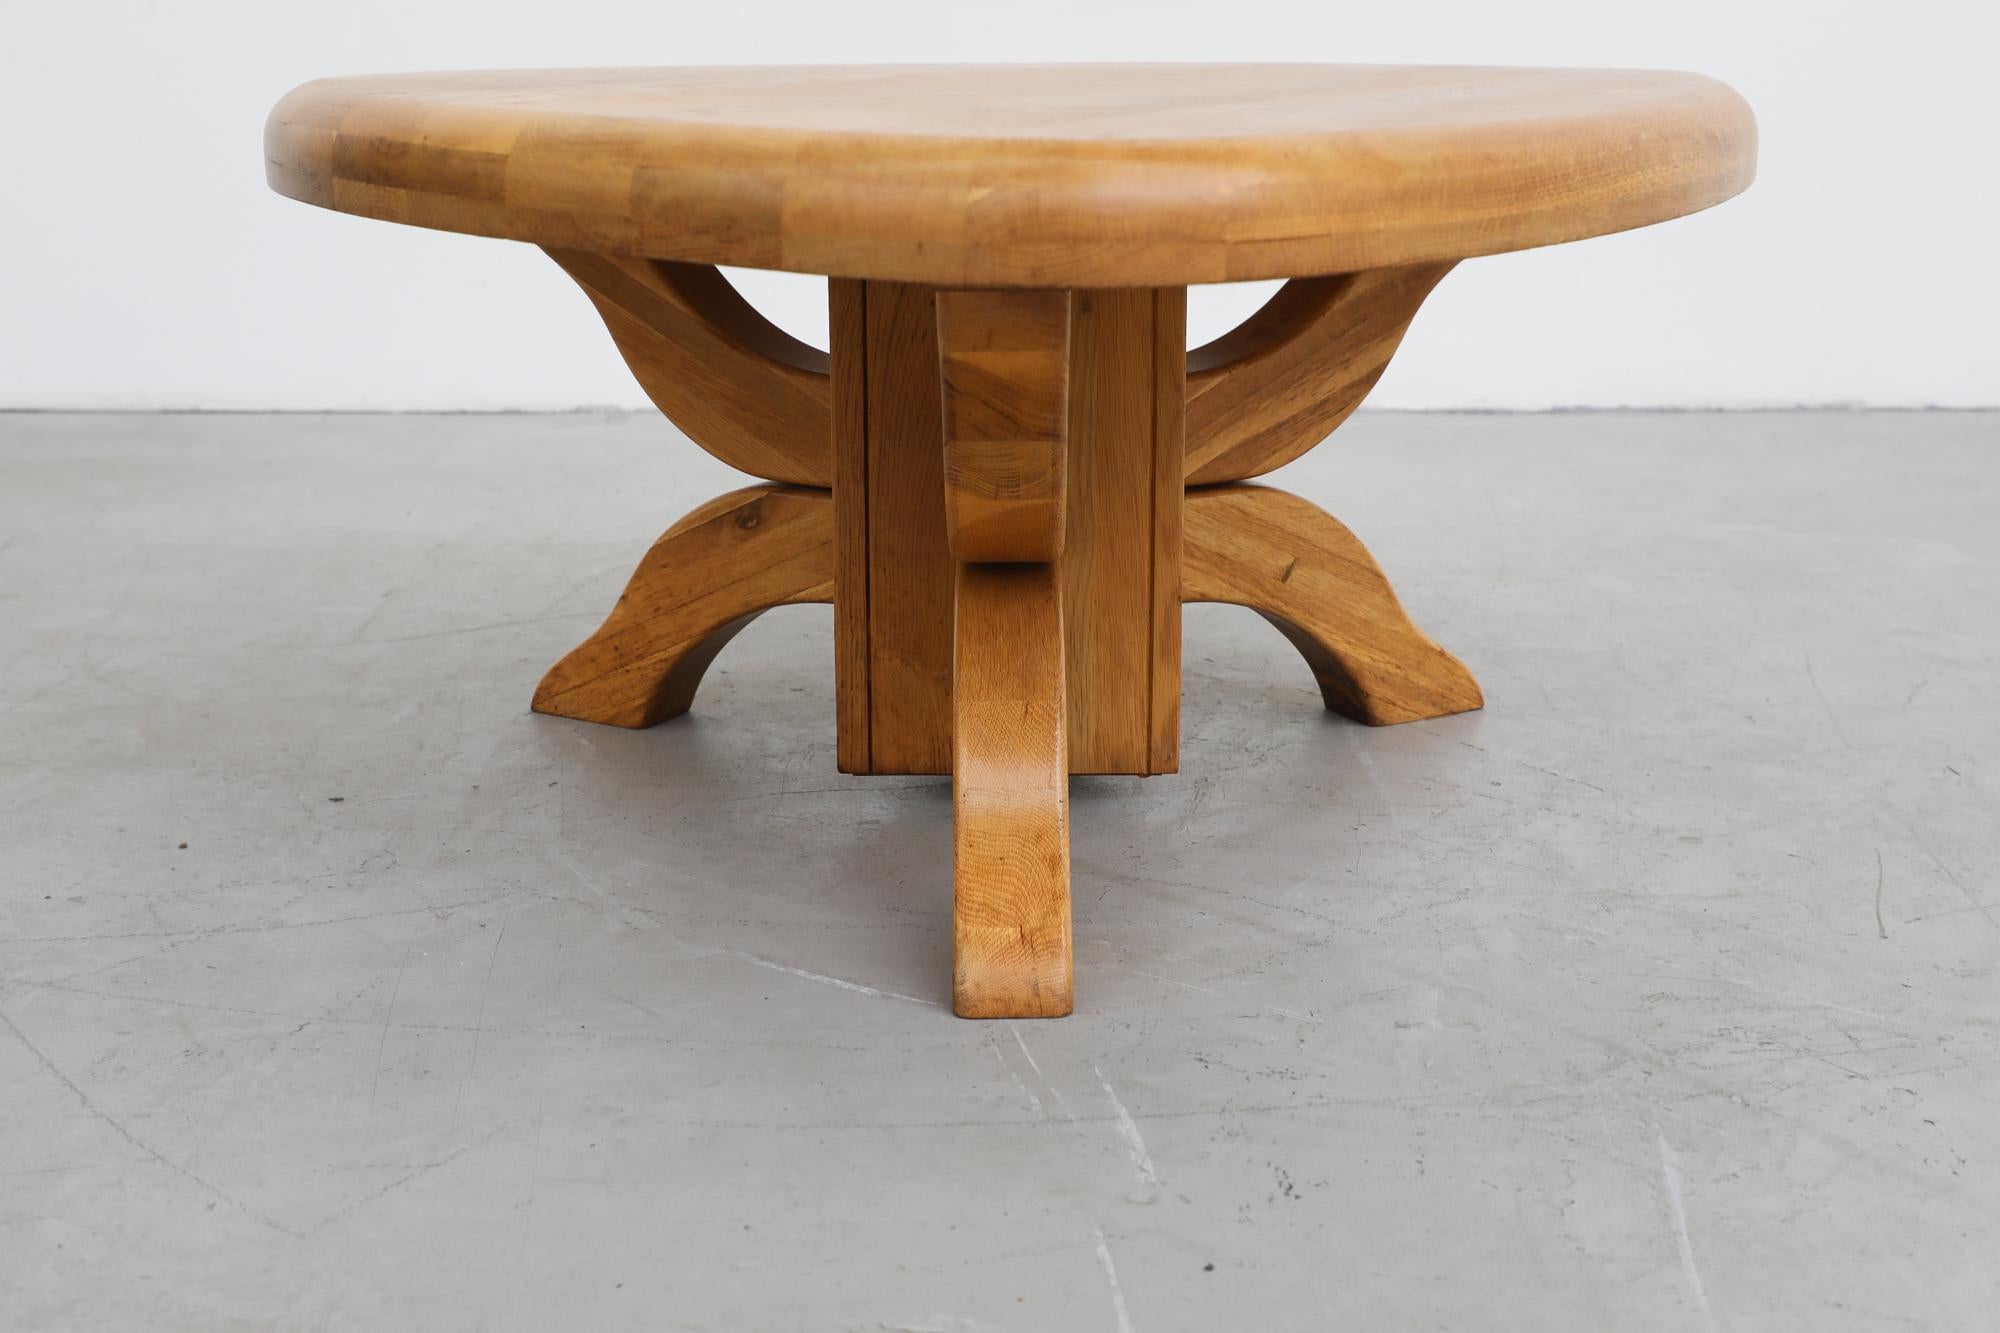 Pierre Chapo Inspired Brutalist Golden Oak Triangular Side Table with Thick Top 2